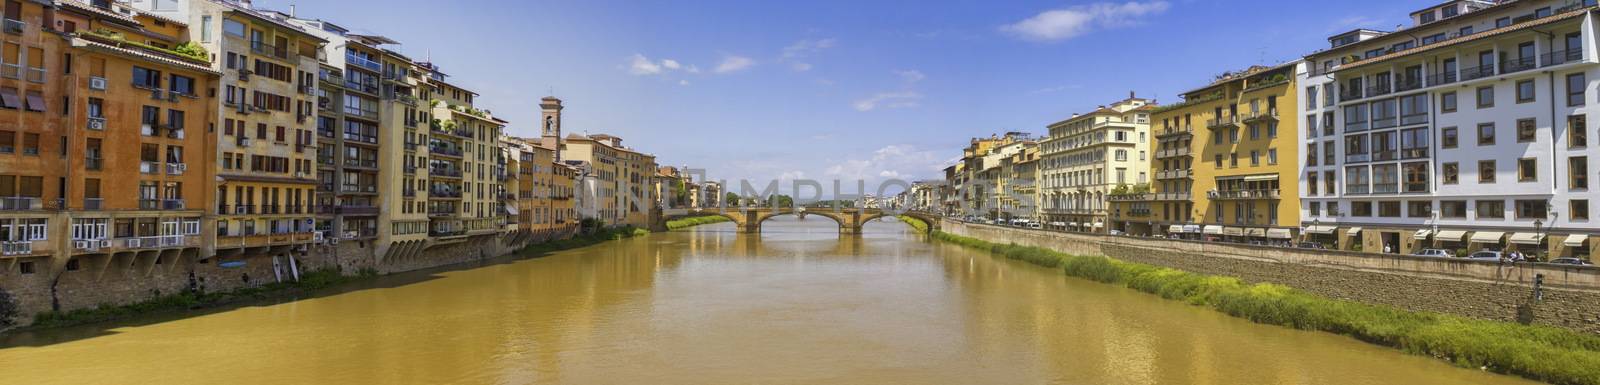 Arno river and old bridge in Florence, Firenze, Italia by Elenaphotos21